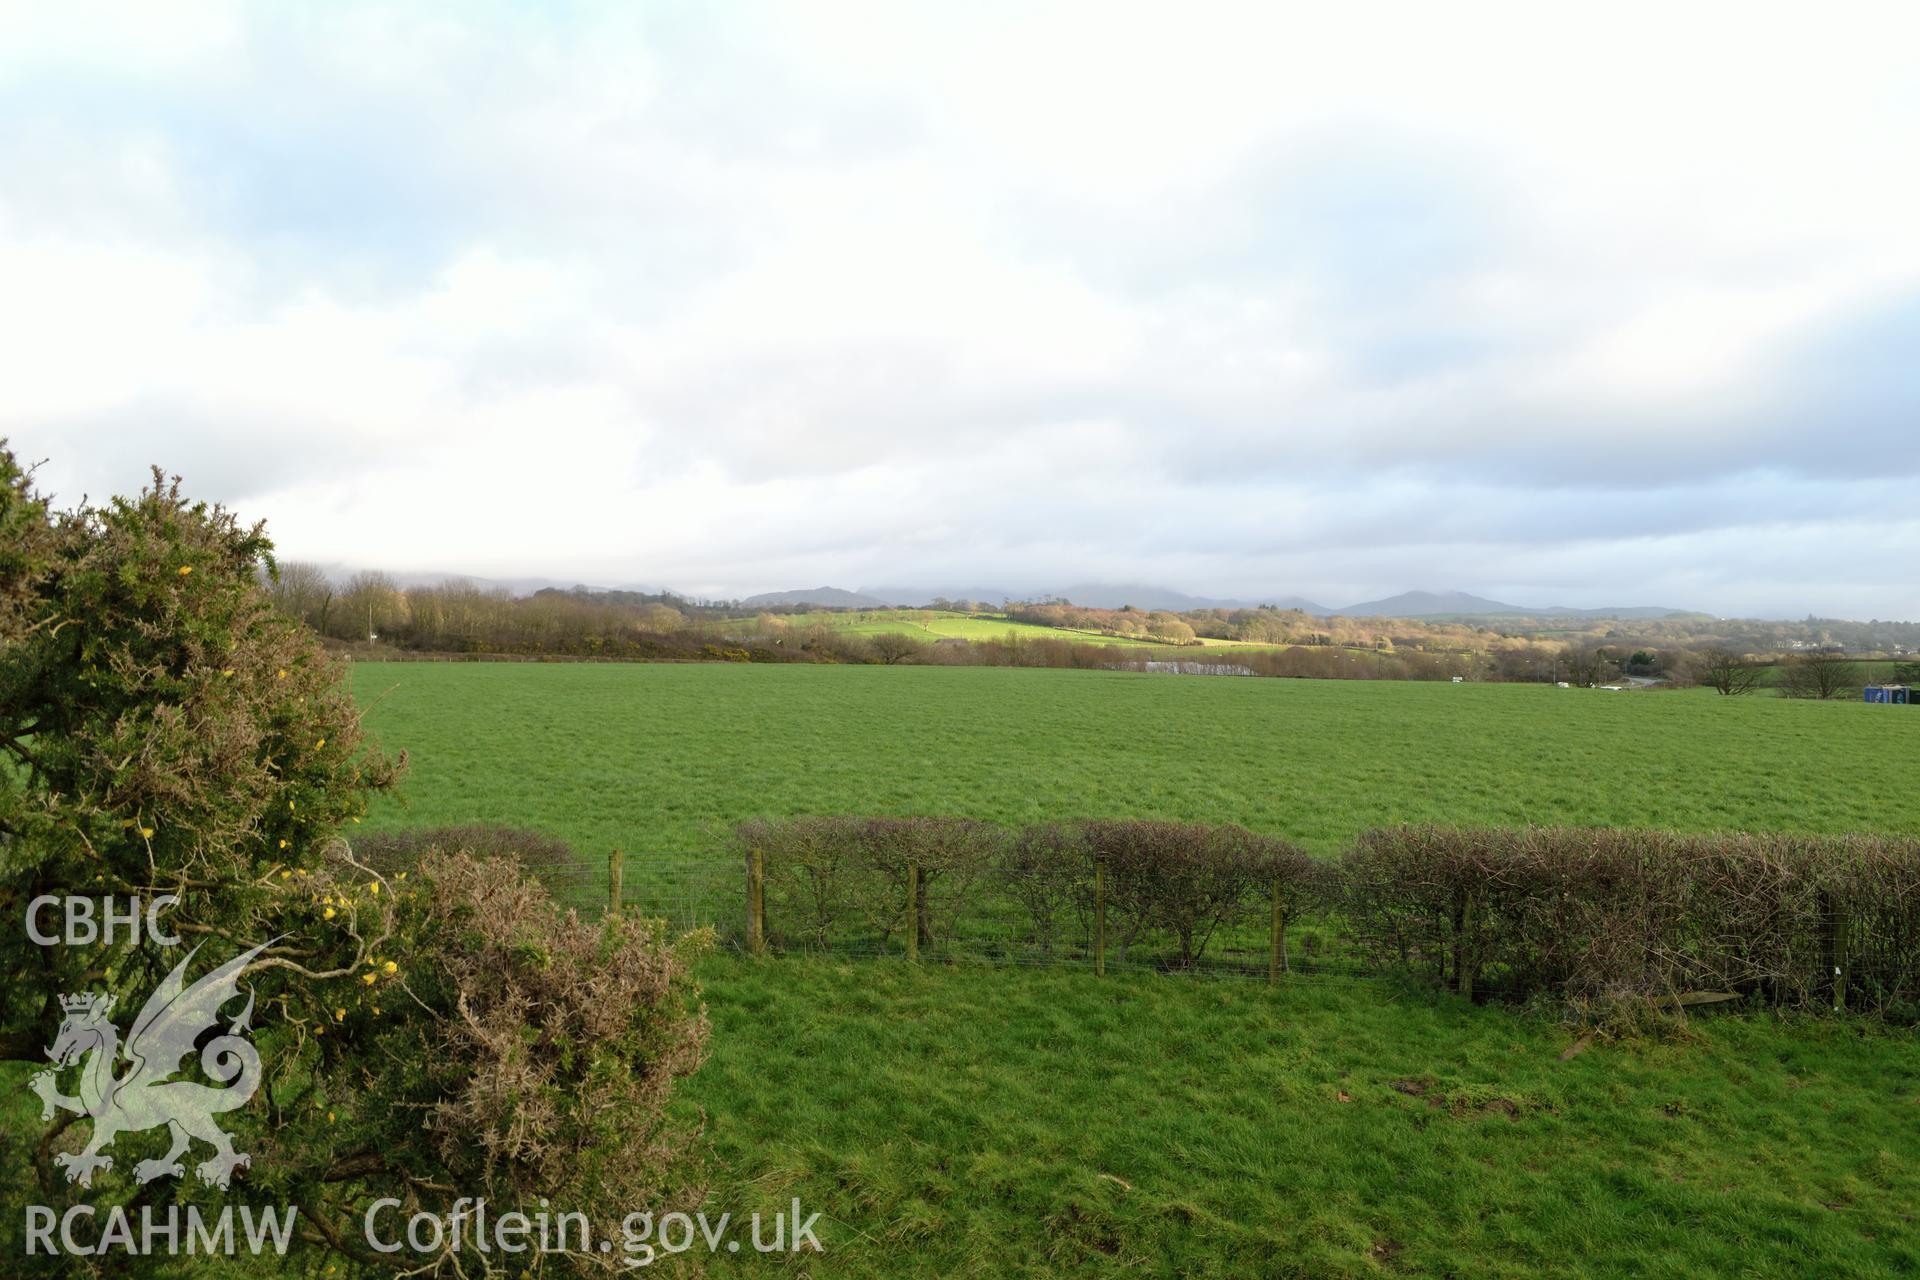 View from north edge of Tomen Fawr toward A497, photographed by Gwynedd Archaeological Trust during impact assessment of the site on 20th December 2018. Project no. G2564.